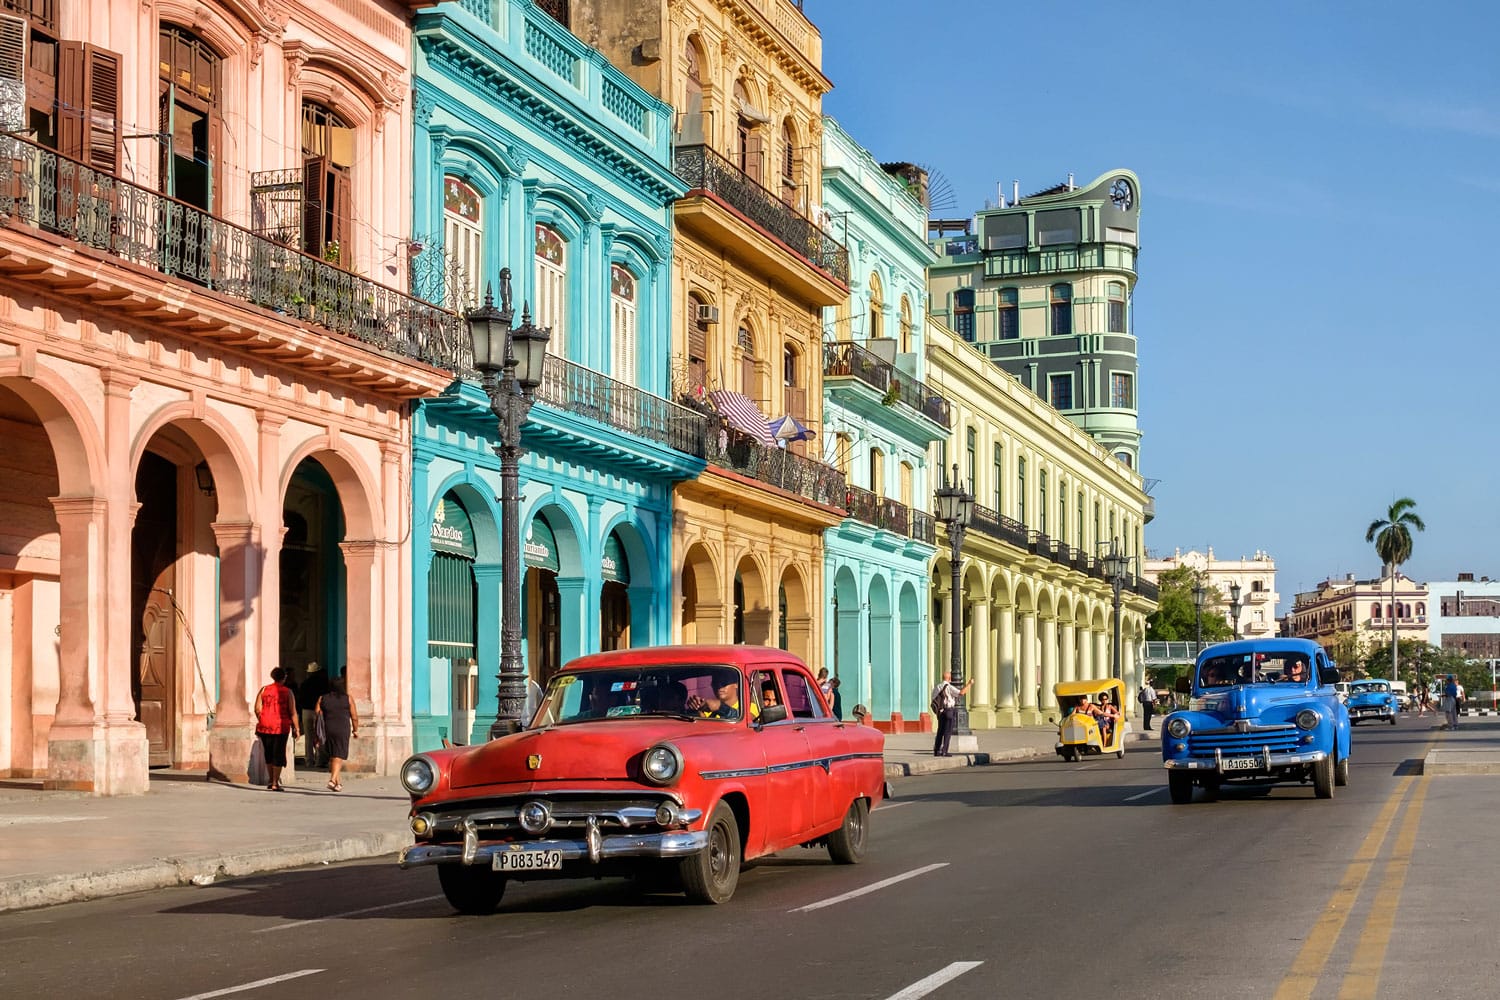 Street scene with colorful buildings and old american car in downtown Havana, Cuba